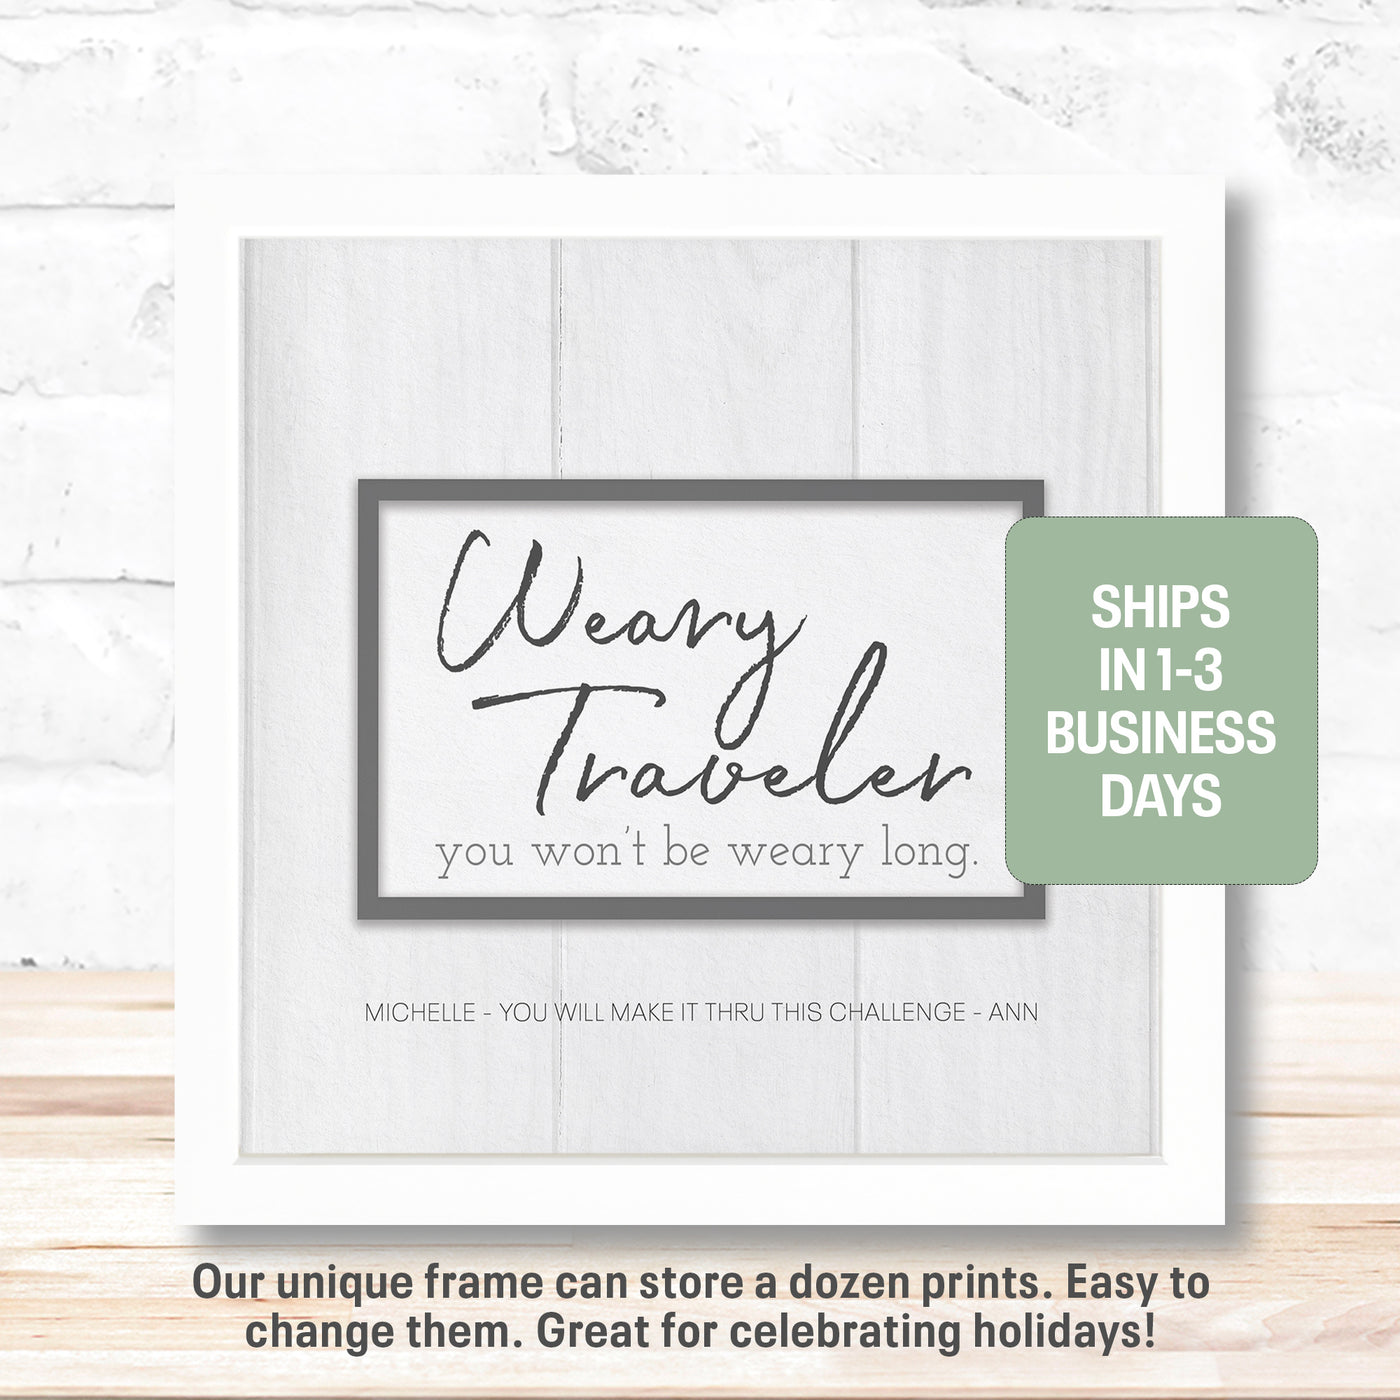 Weary Traveler | Friend, Encouragement, Cancer, Sickness, Personalized Print, Wall Decor - Wood